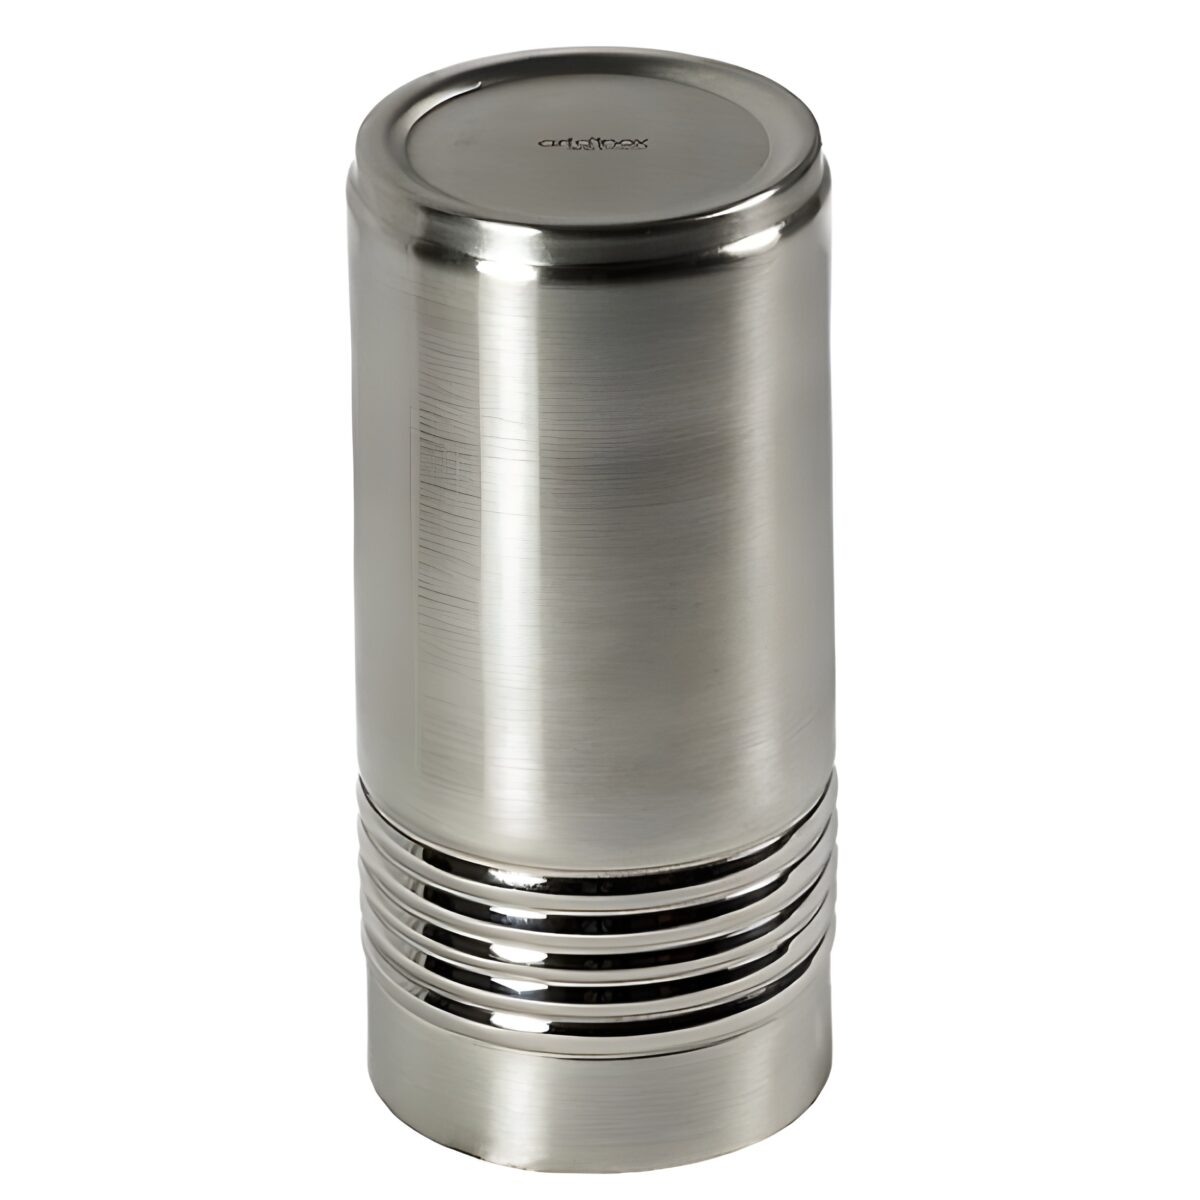 A tumbler is a type of steel or drinking vessel that is usually cylindrical in shape with no handle. It is commonly used for serving various beverages, such as water, juice, soda, or cocktails.